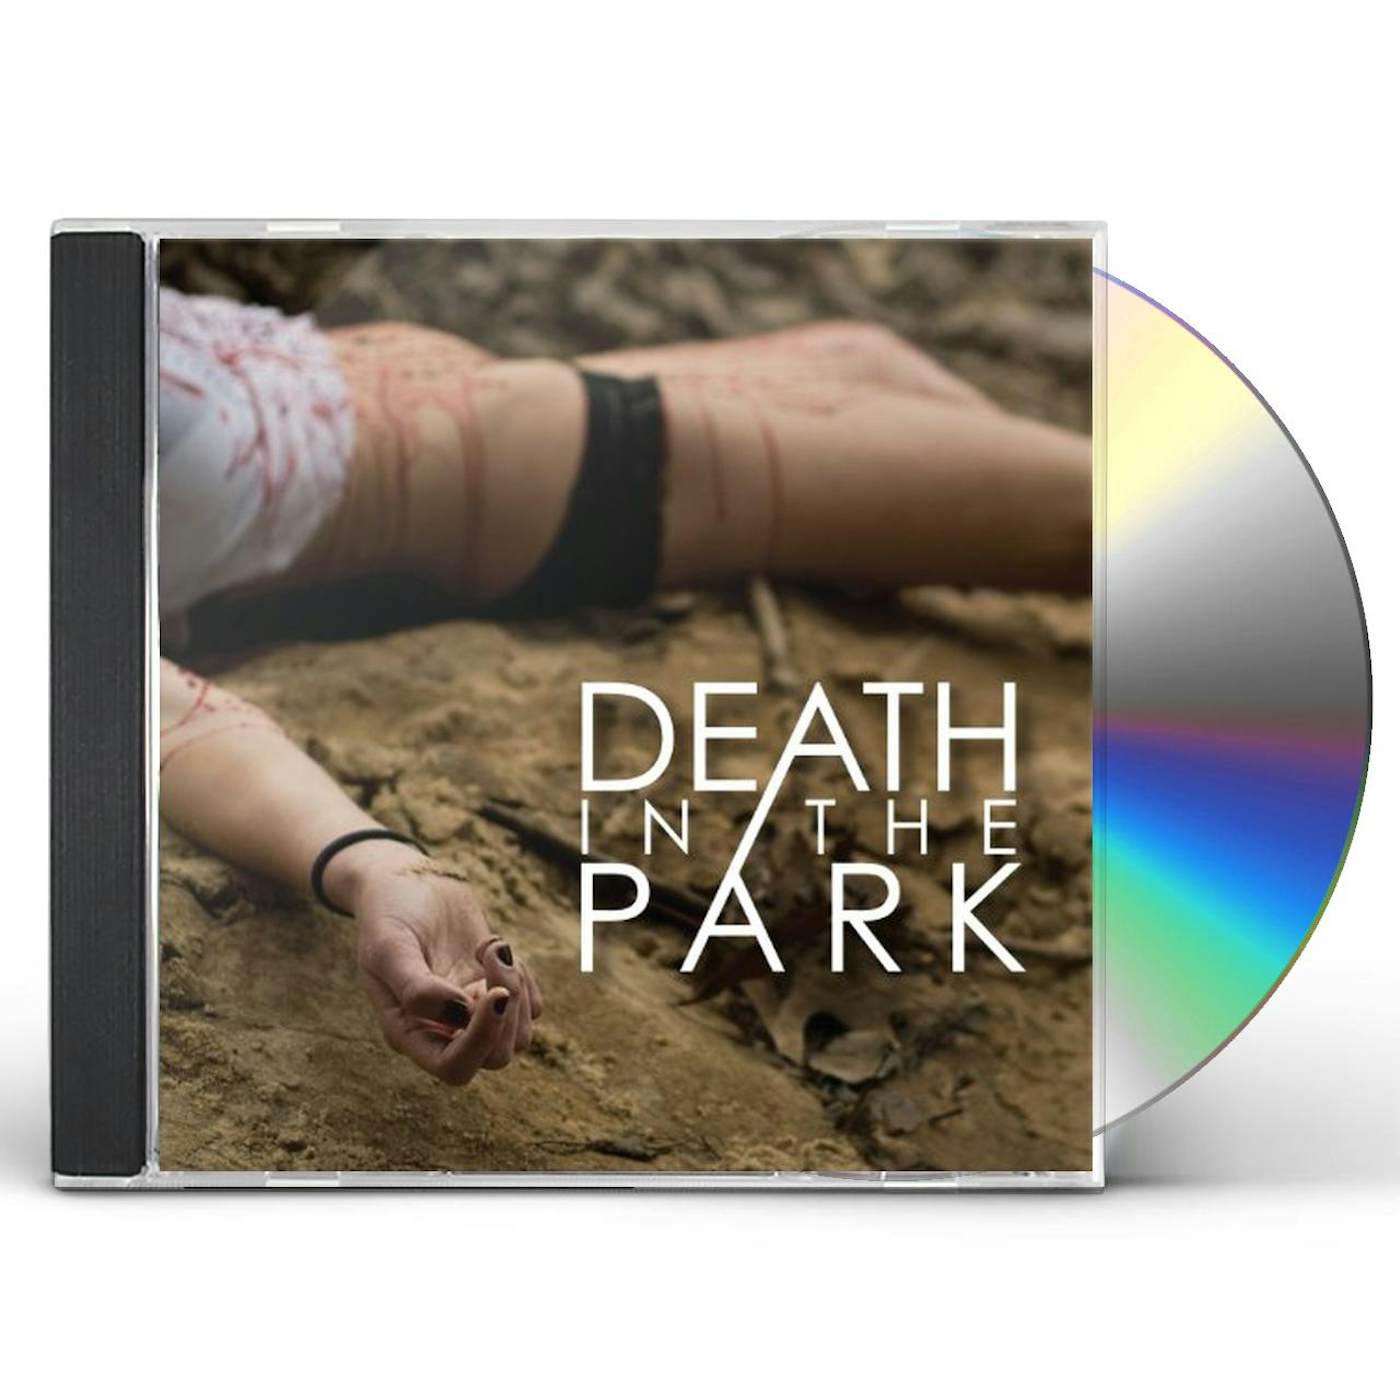 DEATH IN THE PARK CD